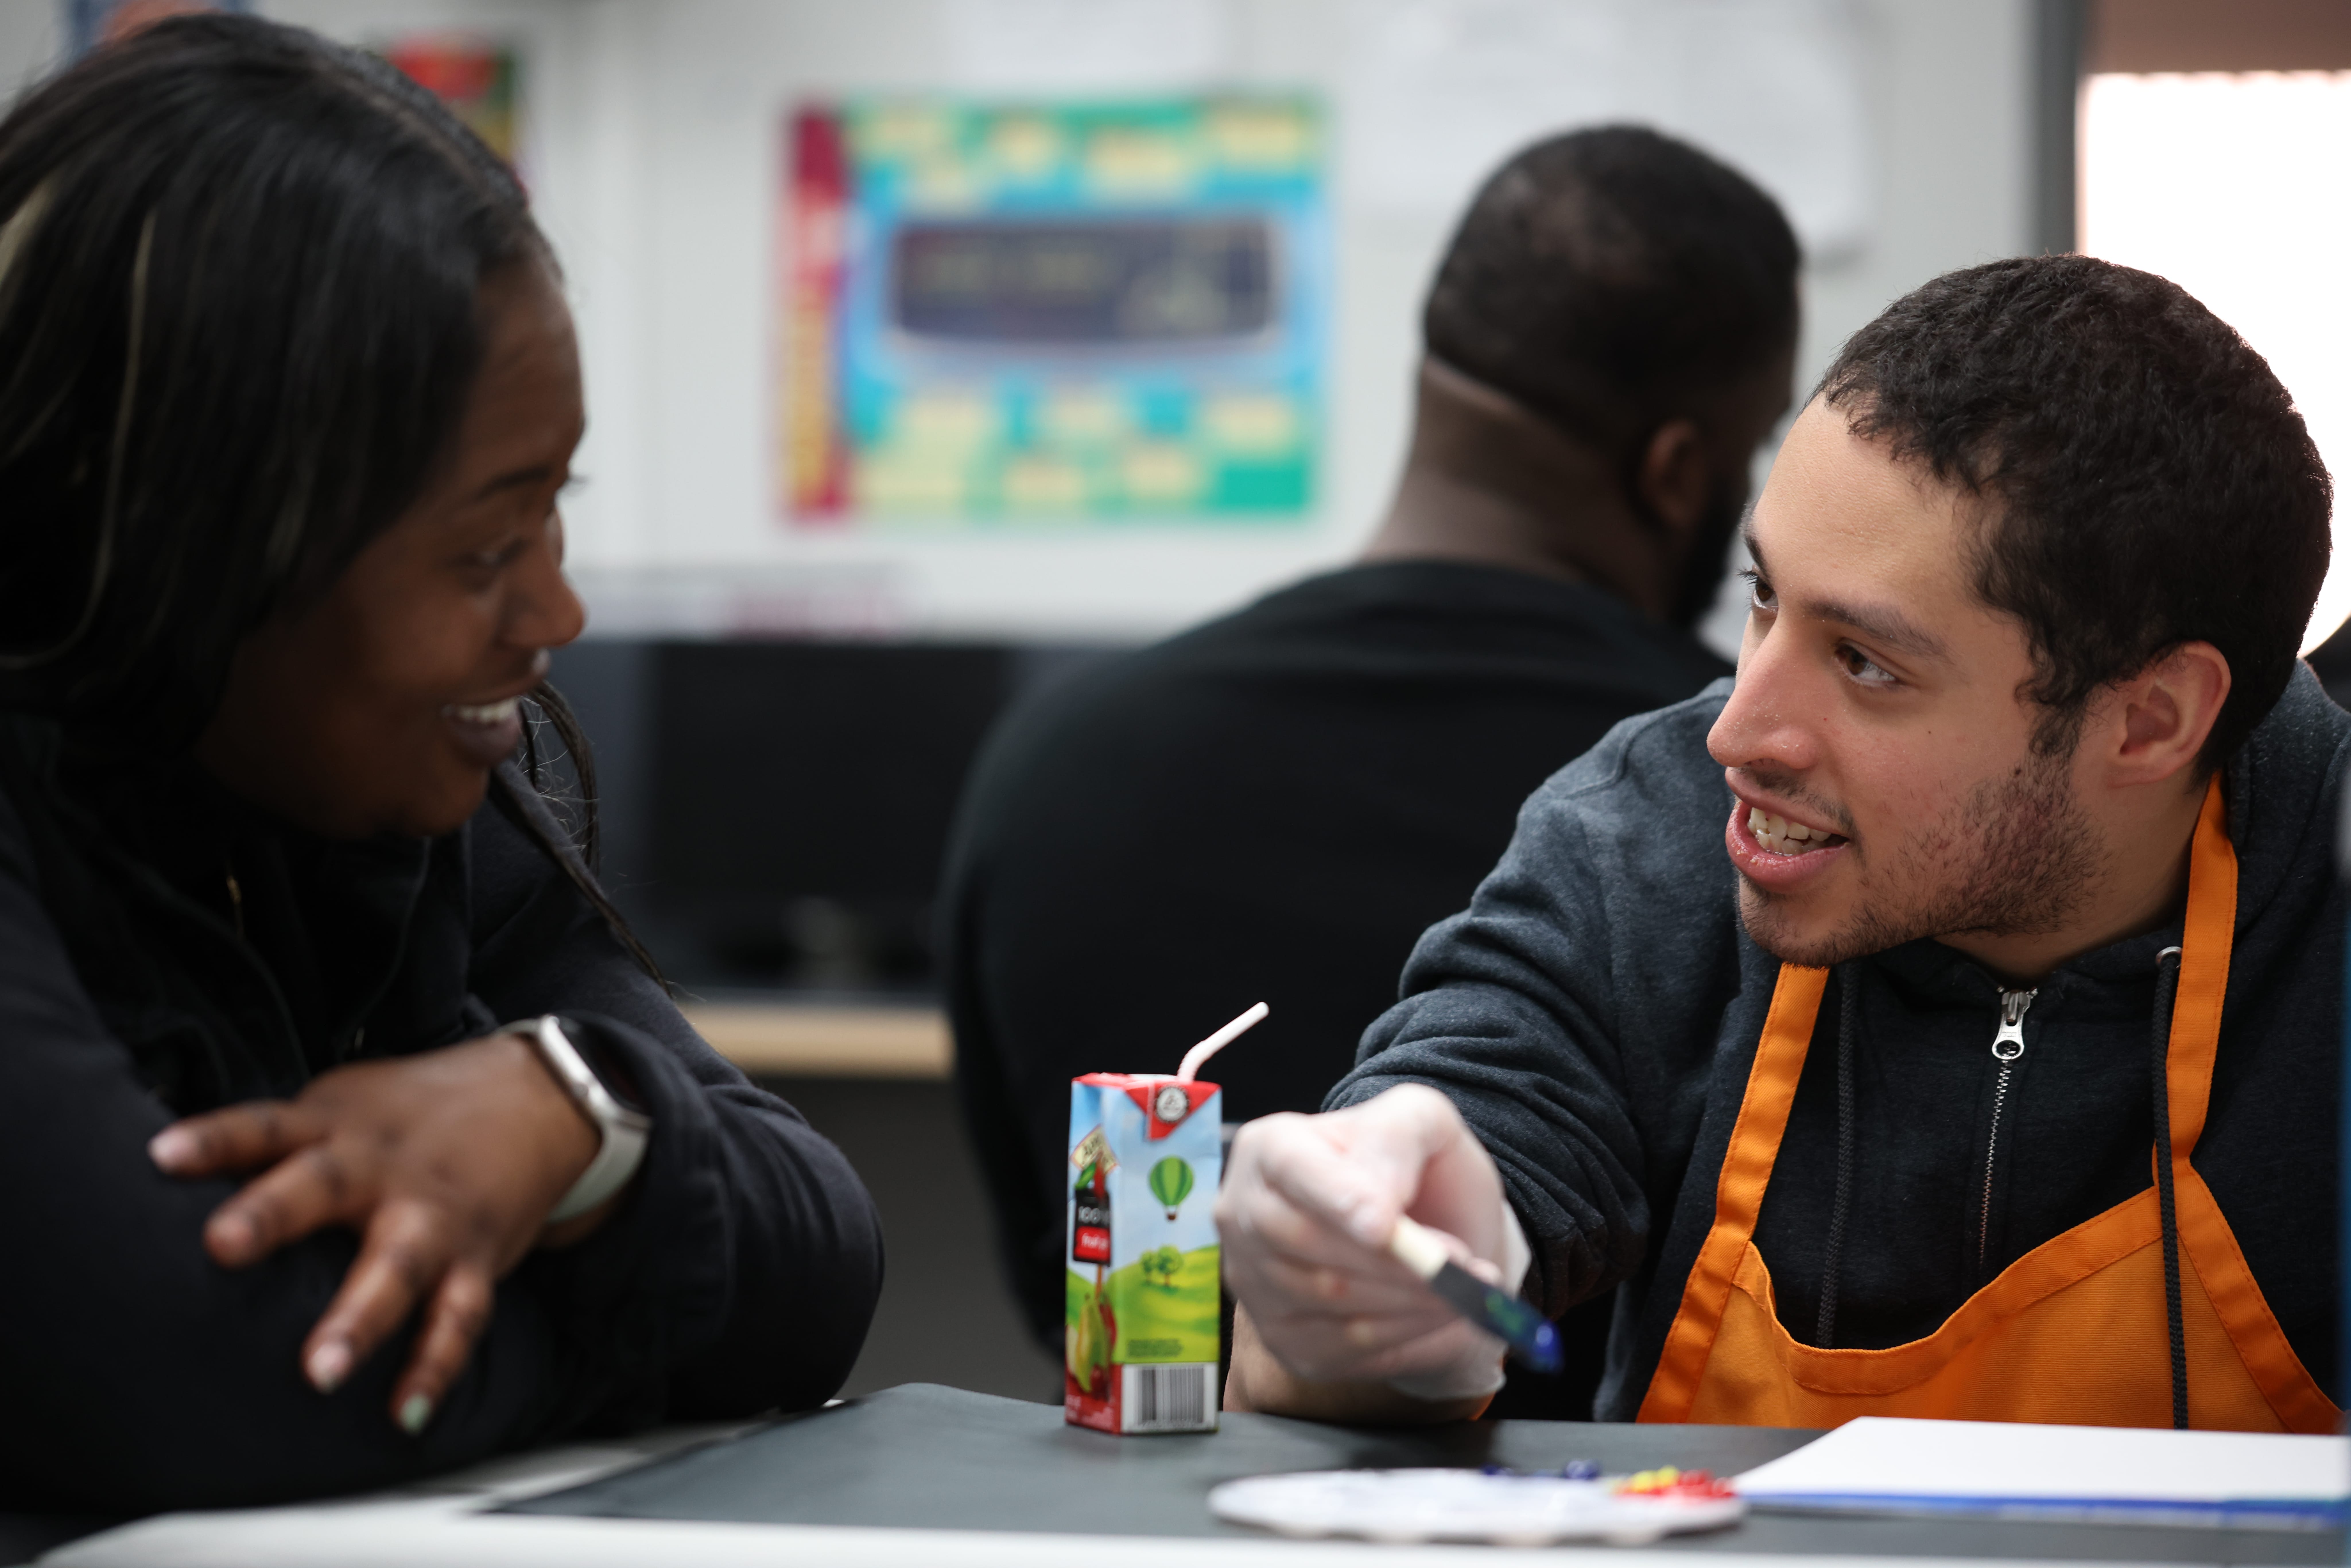 A direct support professional converses with a program participant.